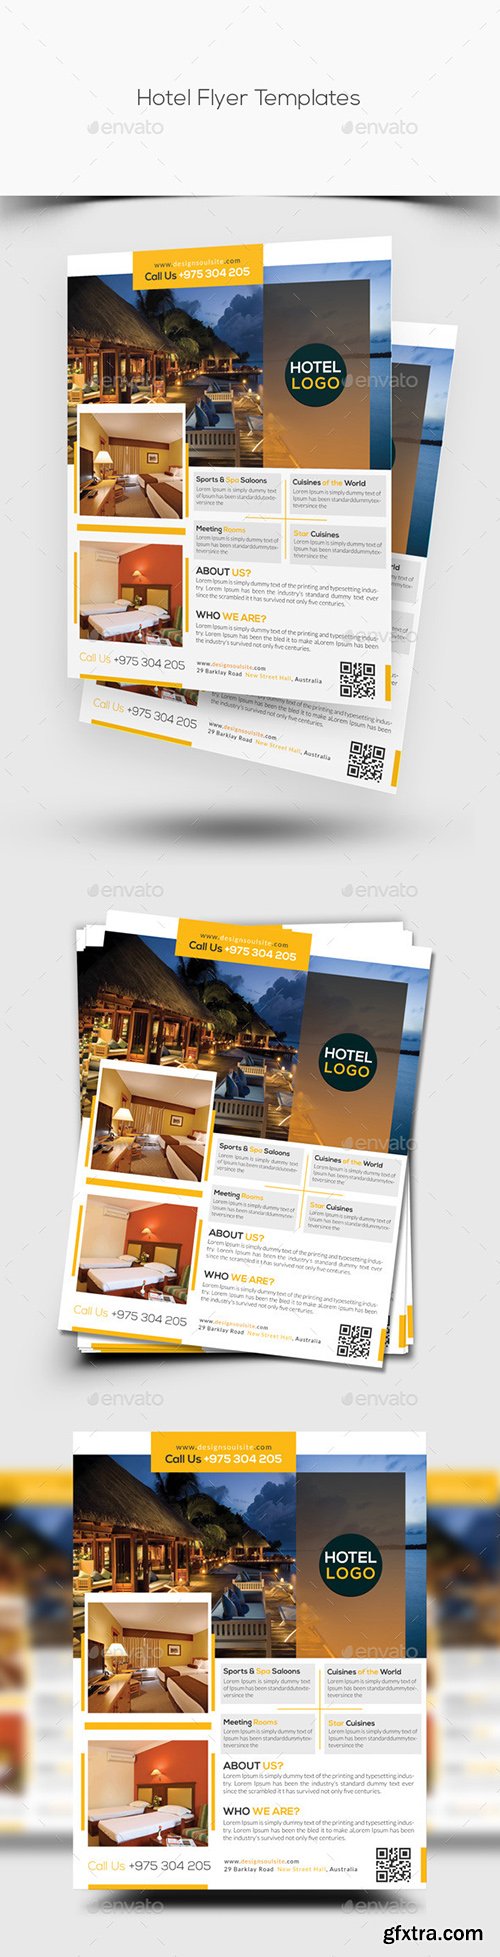 Graphicriver Hotel Flyer Template 12492687